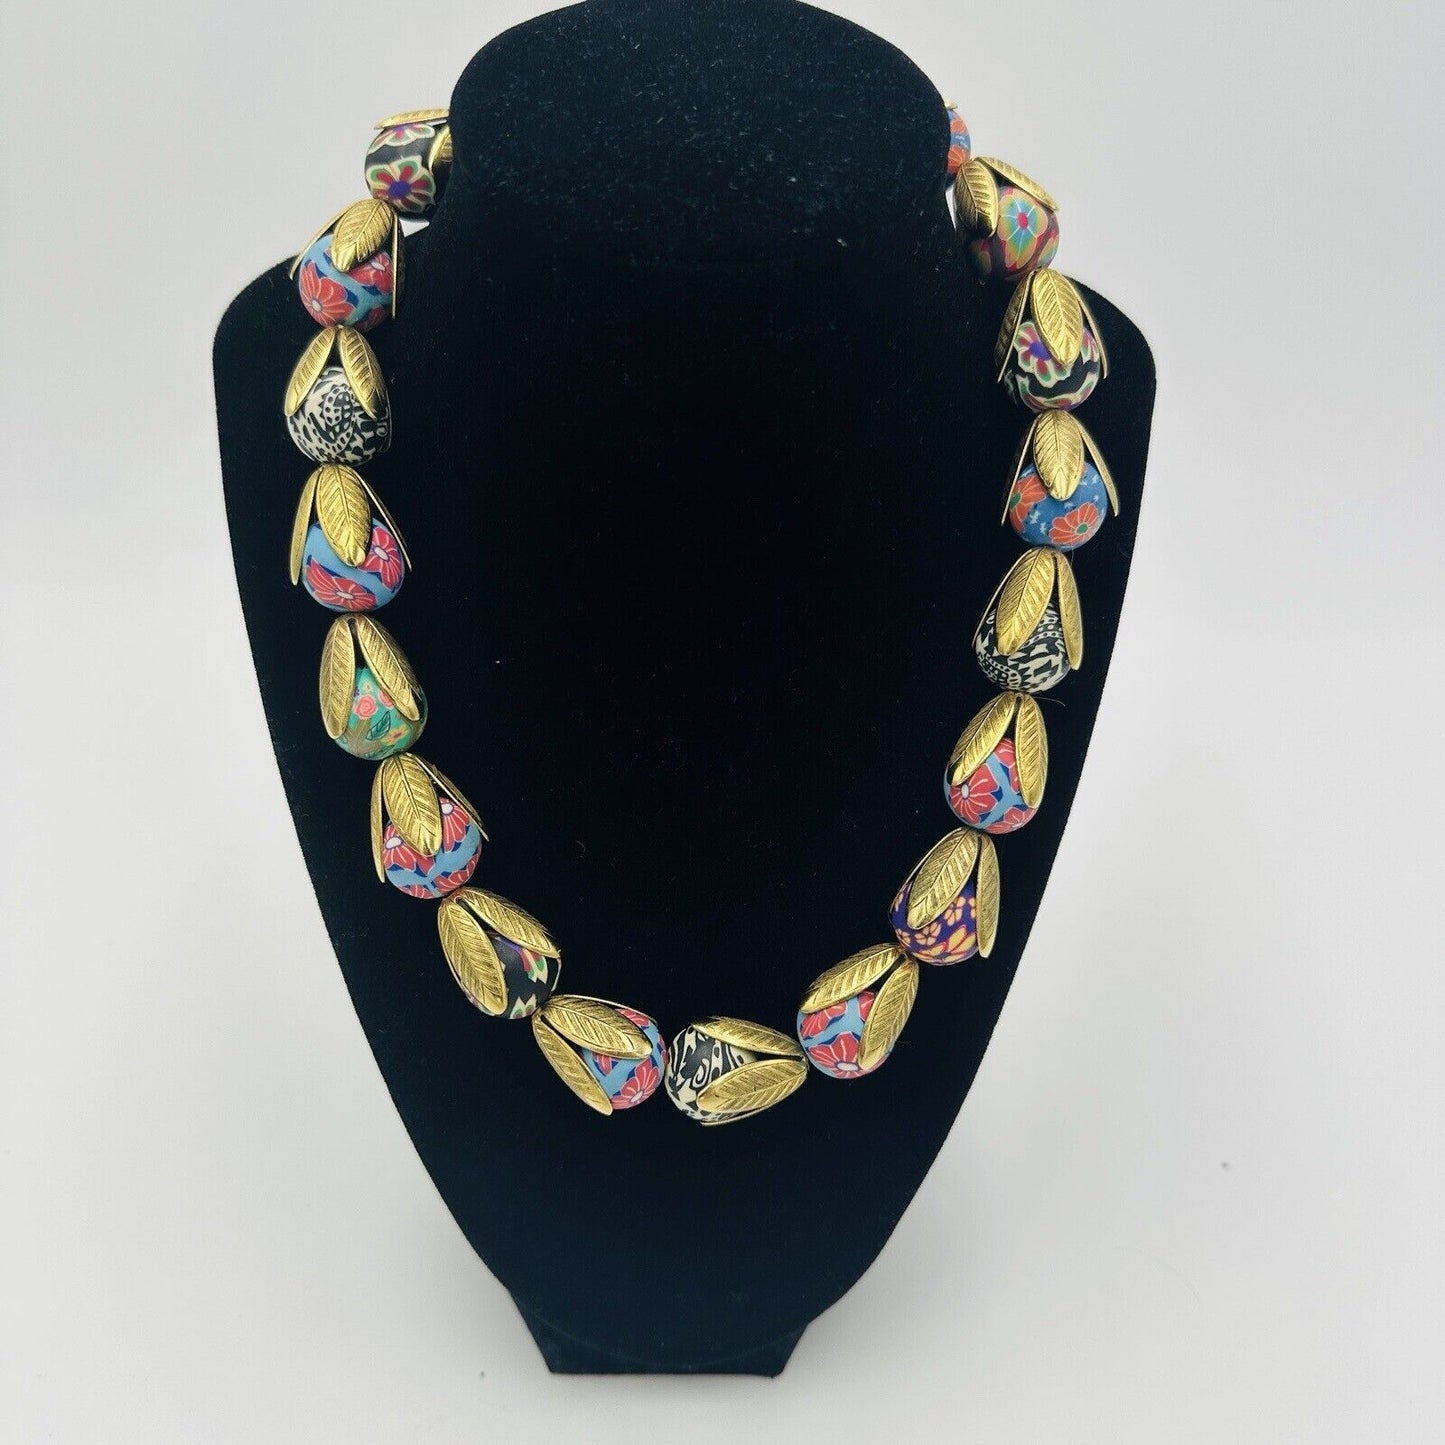 Lenora Dame Gold Tone Floral Tulips Abstract  Multicolor Beaded Necklace 18”